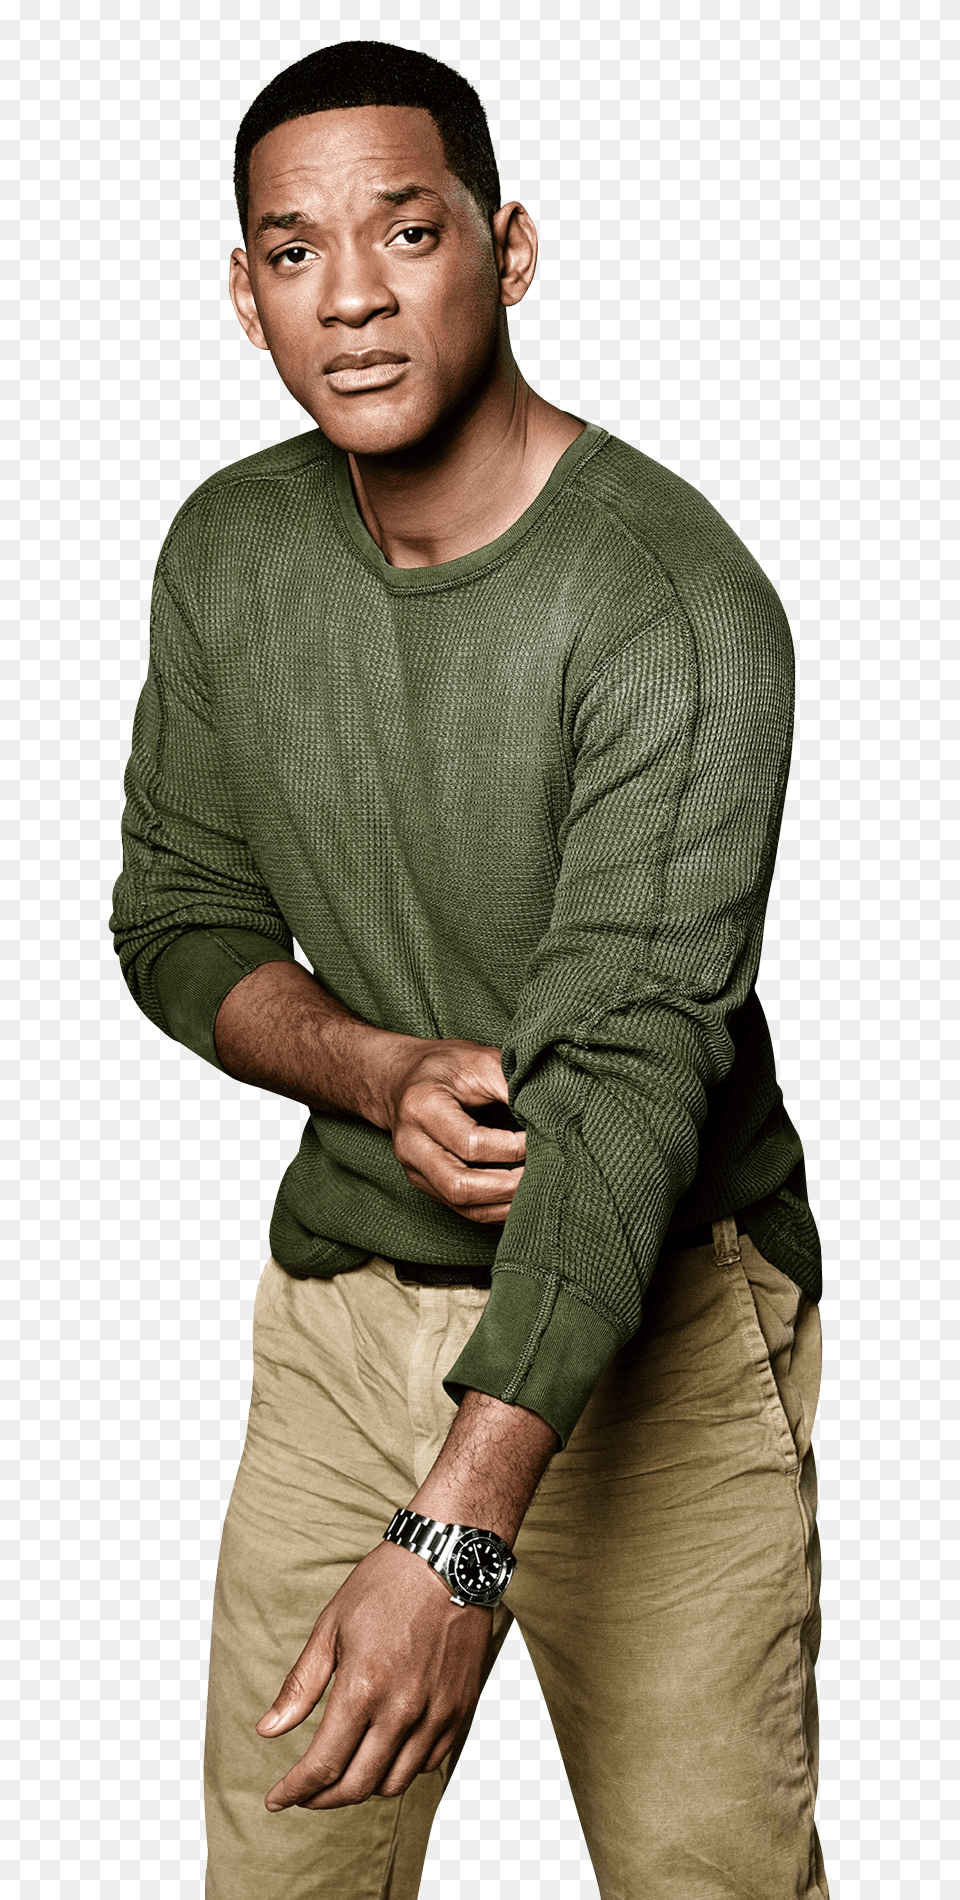 Pngpix Com Will Smith Transparent Image, Long Sleeve, Sleeve, Clothing, Person Png